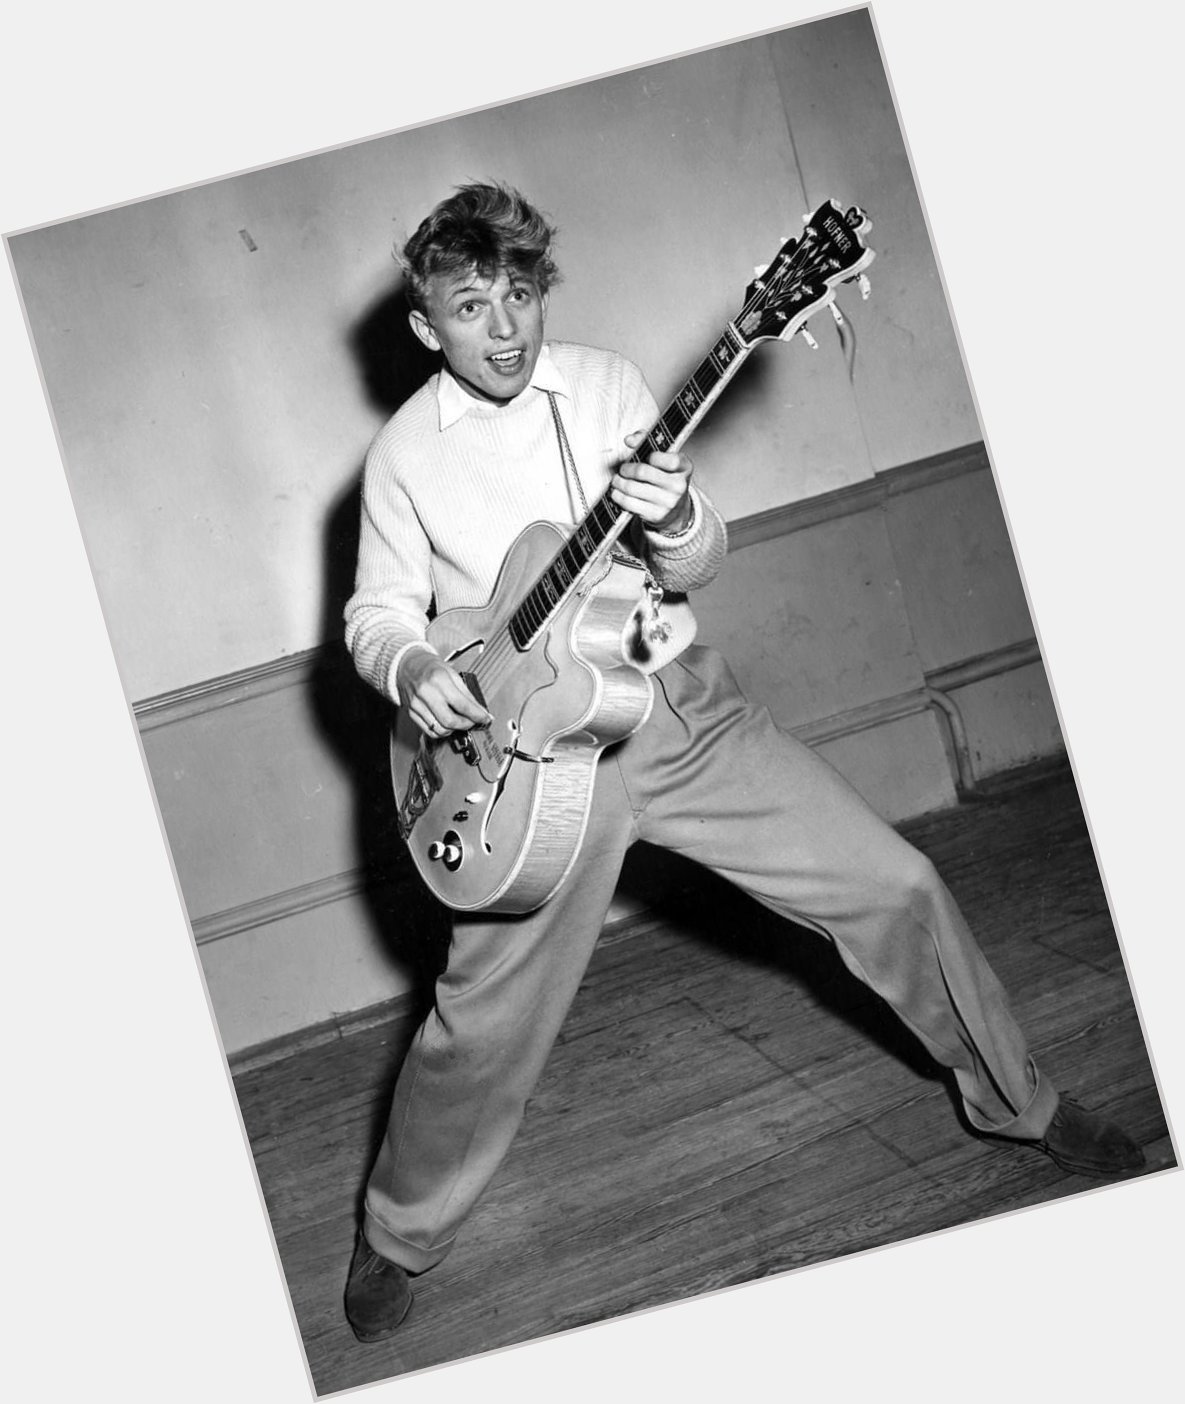 Happy birthday to English entertainer and teen idol Tommy Steele, born December 17, 1936. 